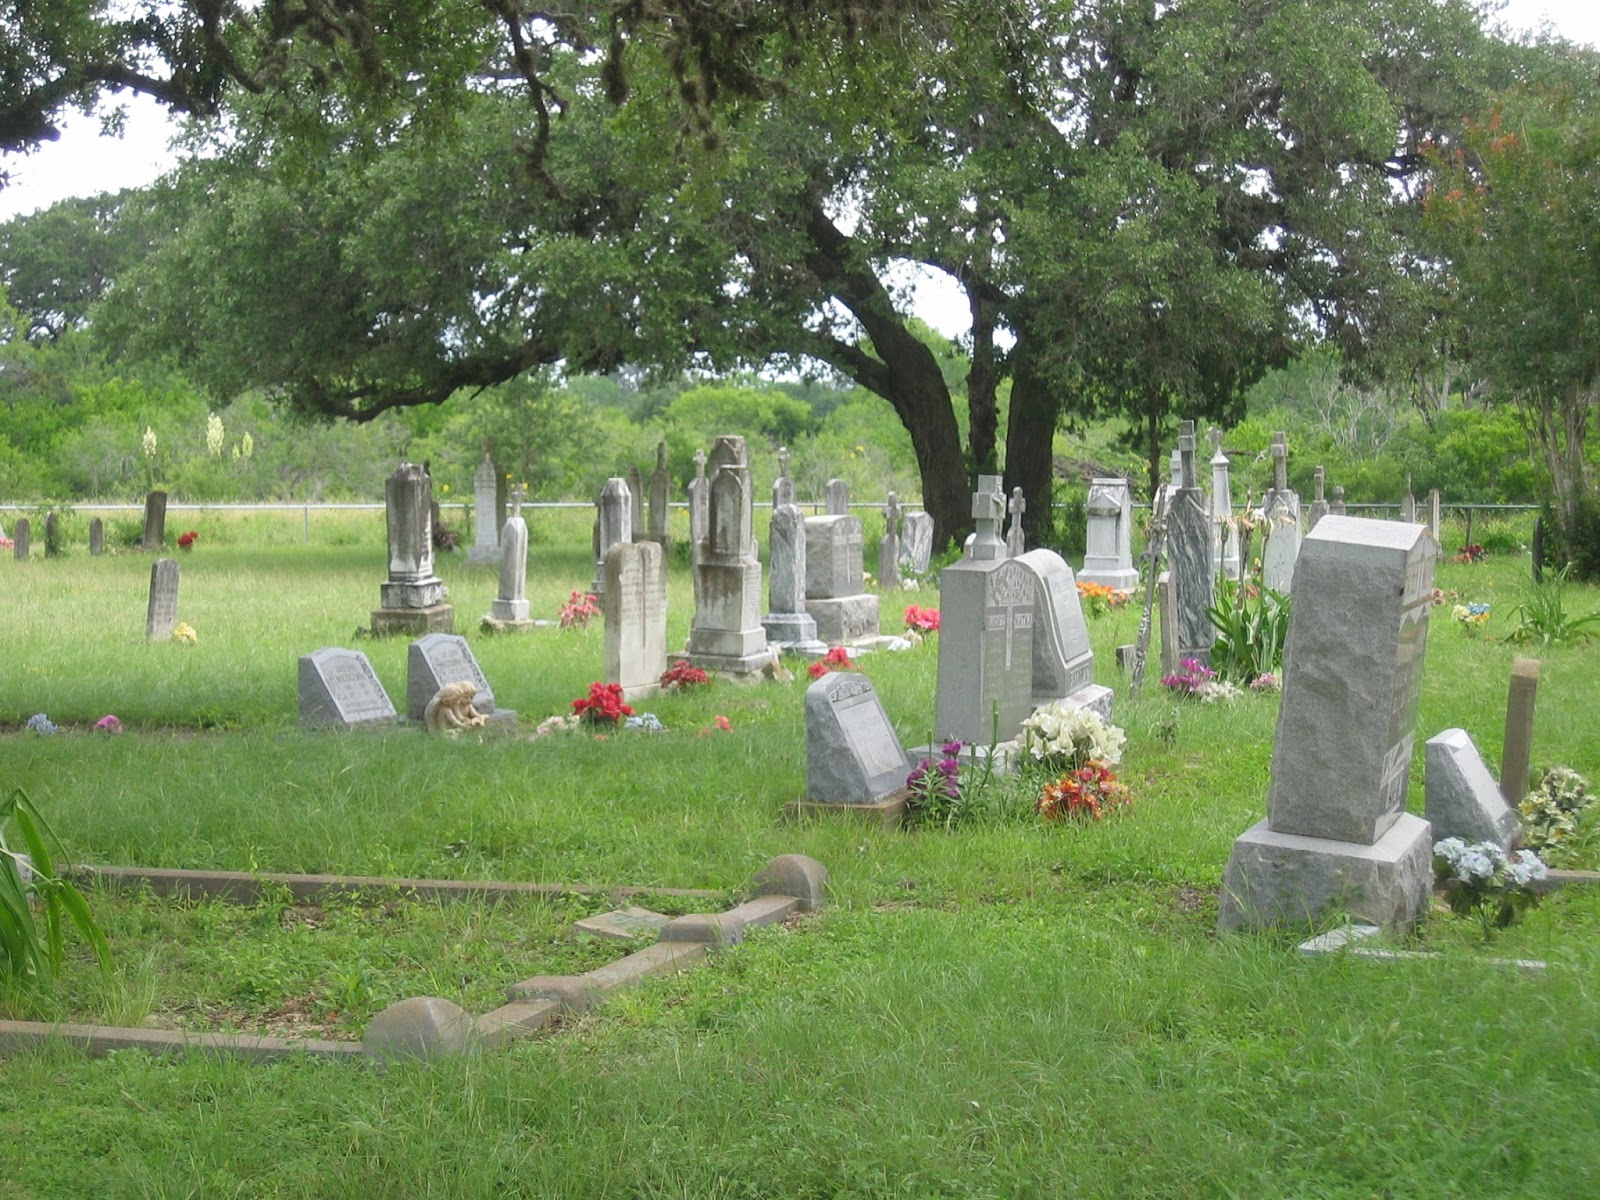 Olive Tree Genealogy Blog: Join Me on a Cemetery Walk Through Panna ...